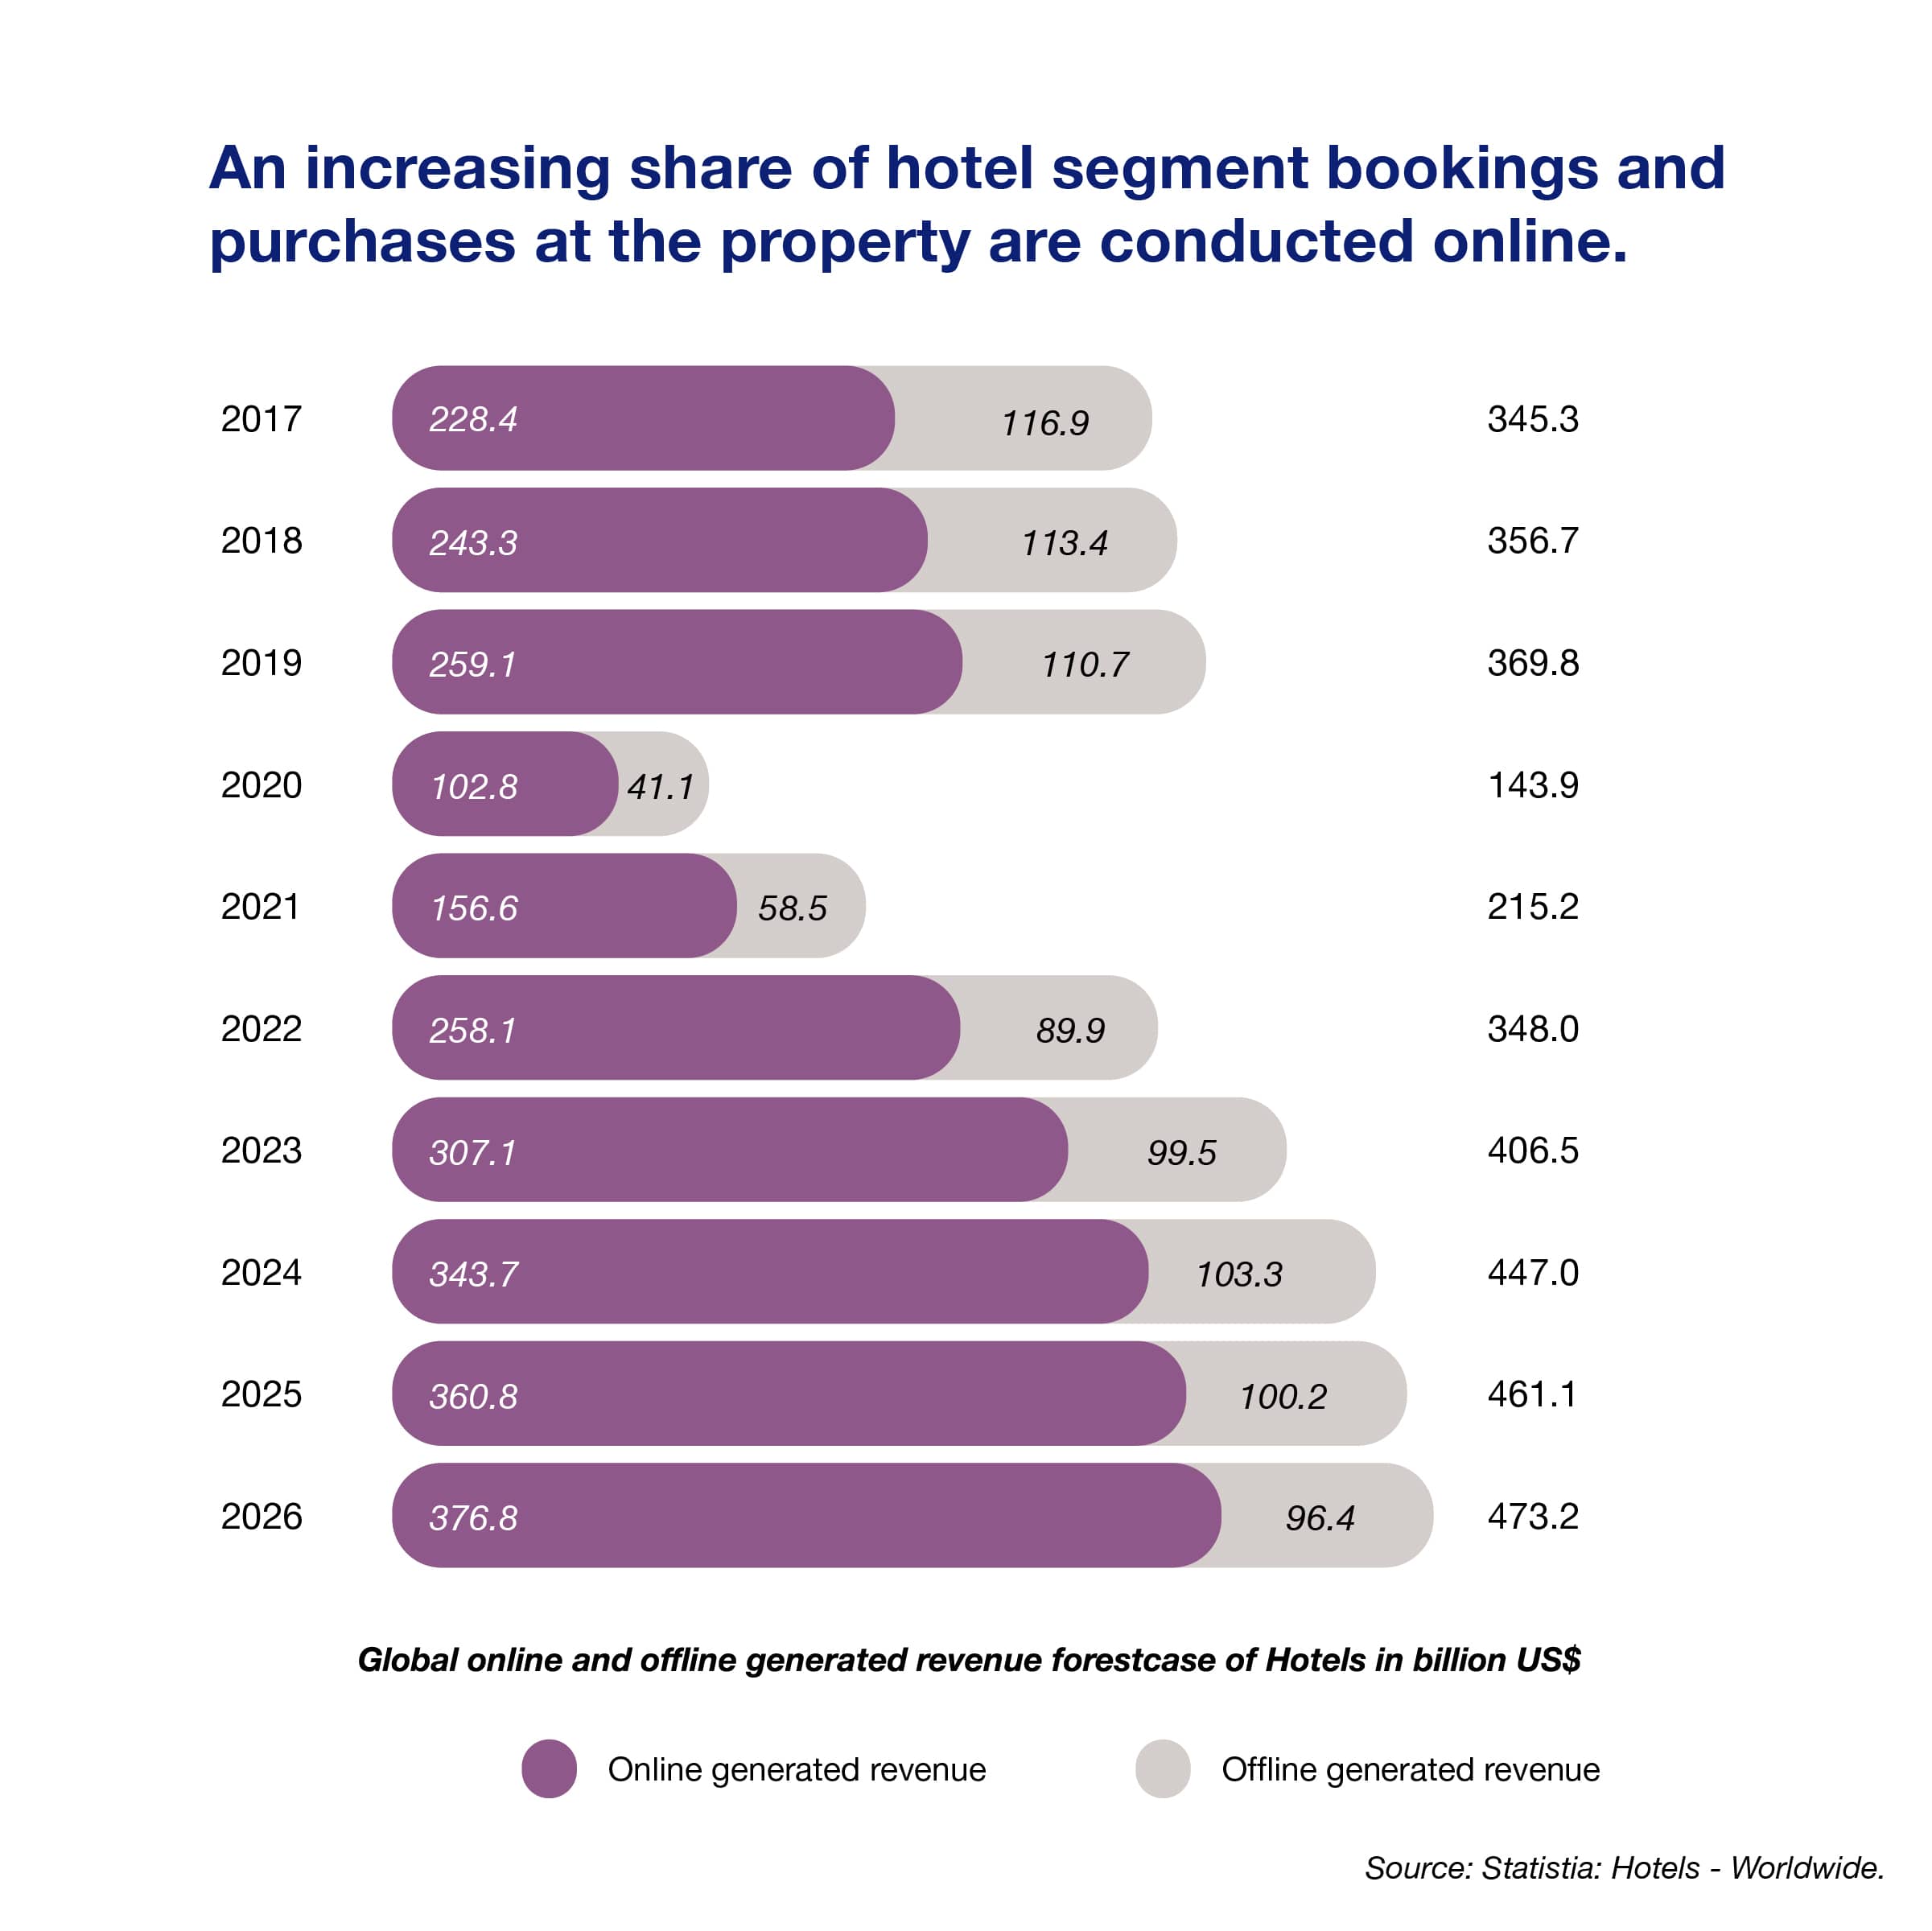 An increasing share of hotel segment bookings and purchases at the property are conducted online.